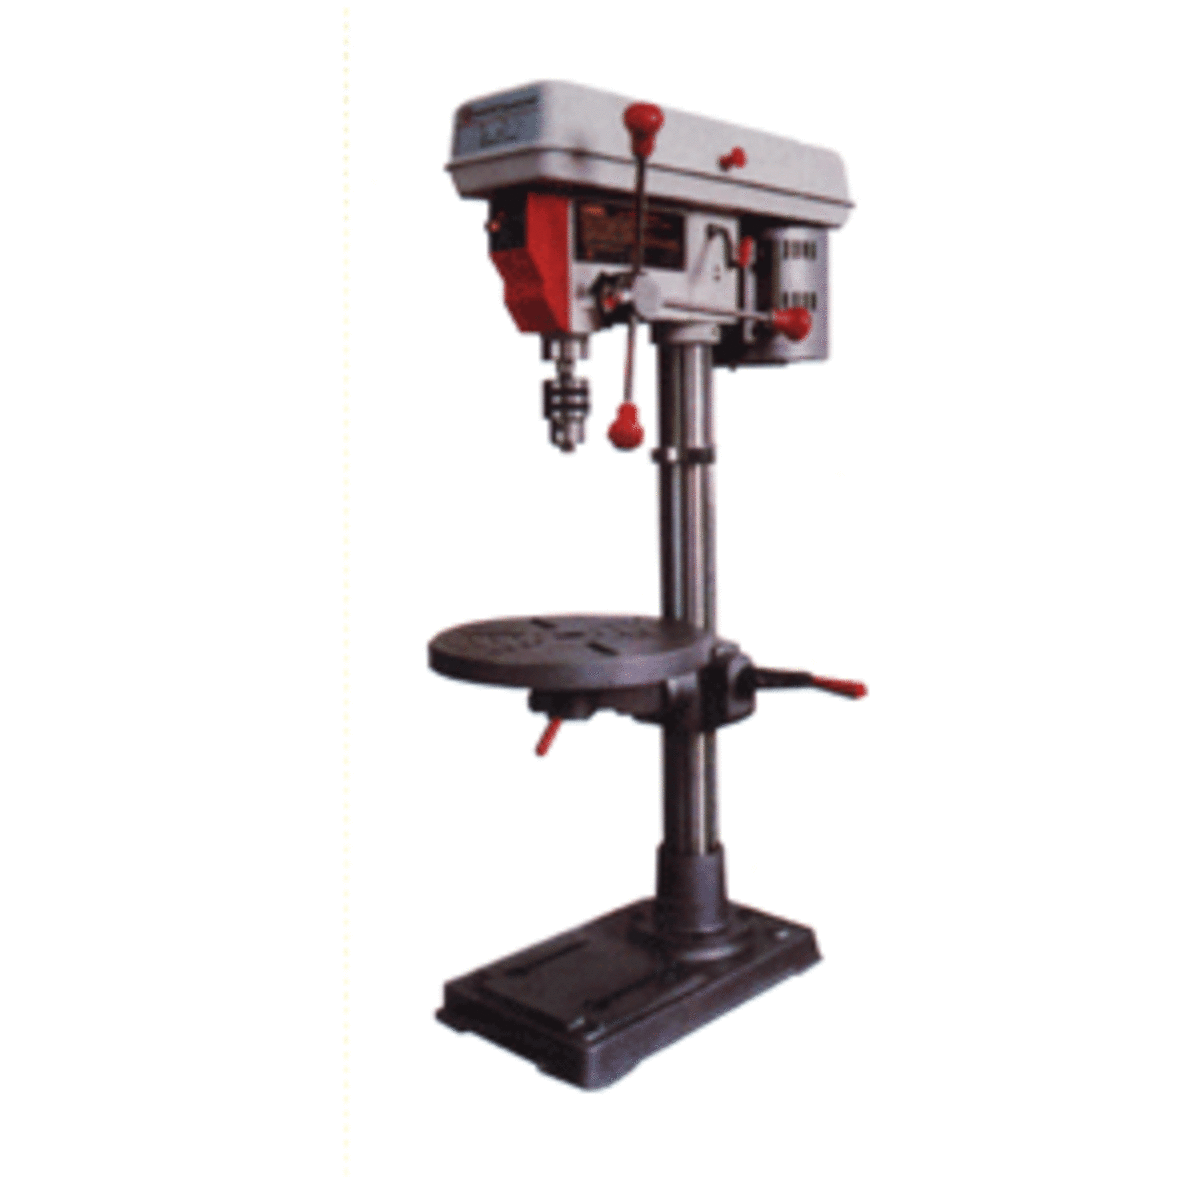 A pedestal drill like this one is very useful in a workshop.